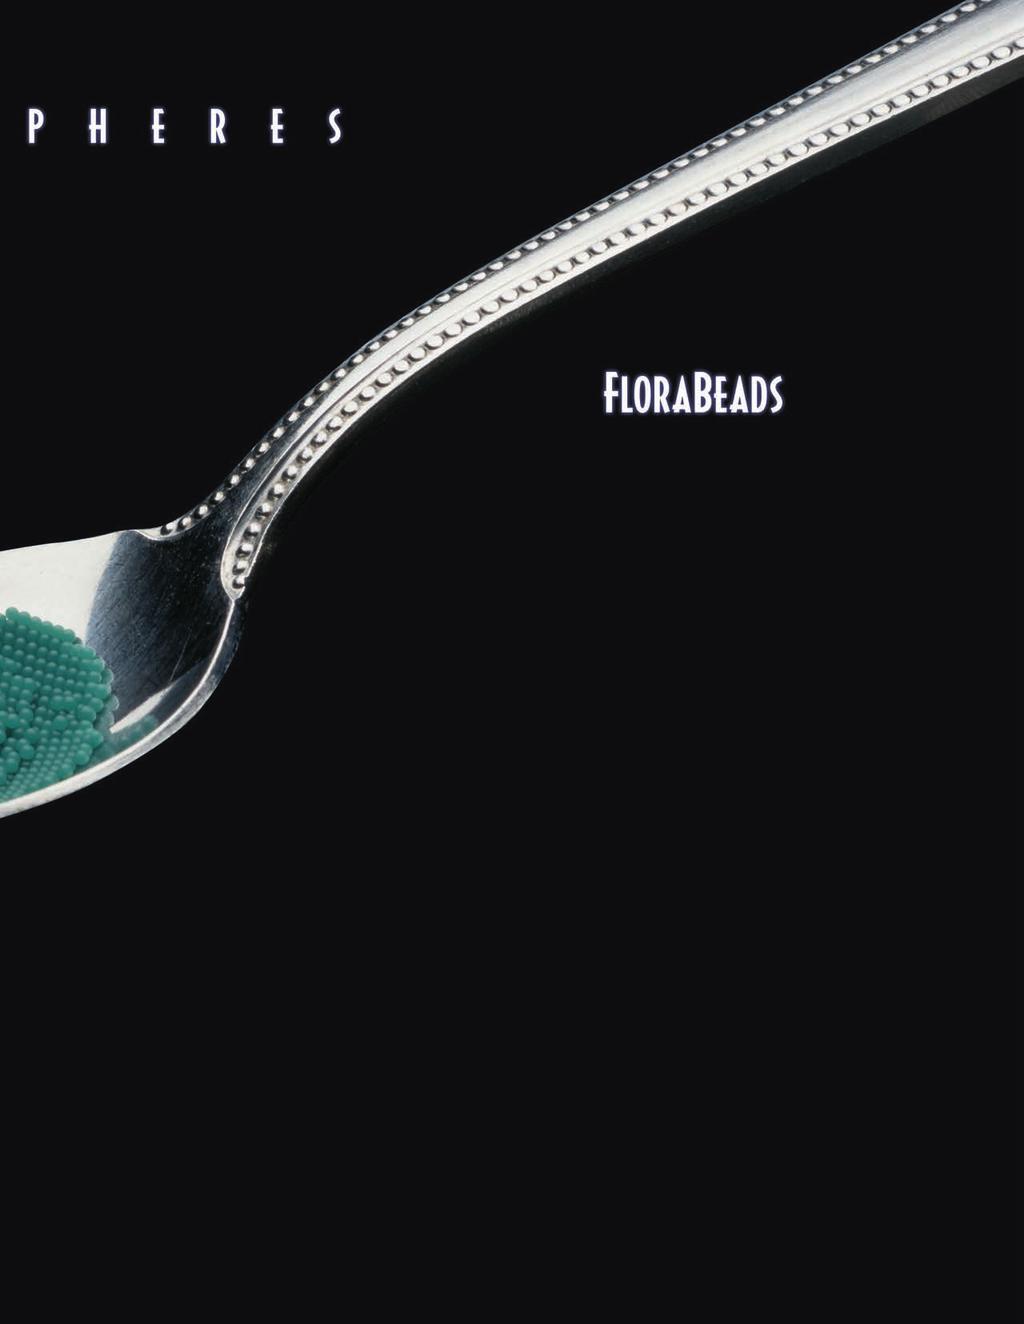 Description Florabeads are hard, free-flowing microspheres of jojoba esters (rice bran wax or carnauba wax beads are also available) delivering gentle yet effective exfoliation.